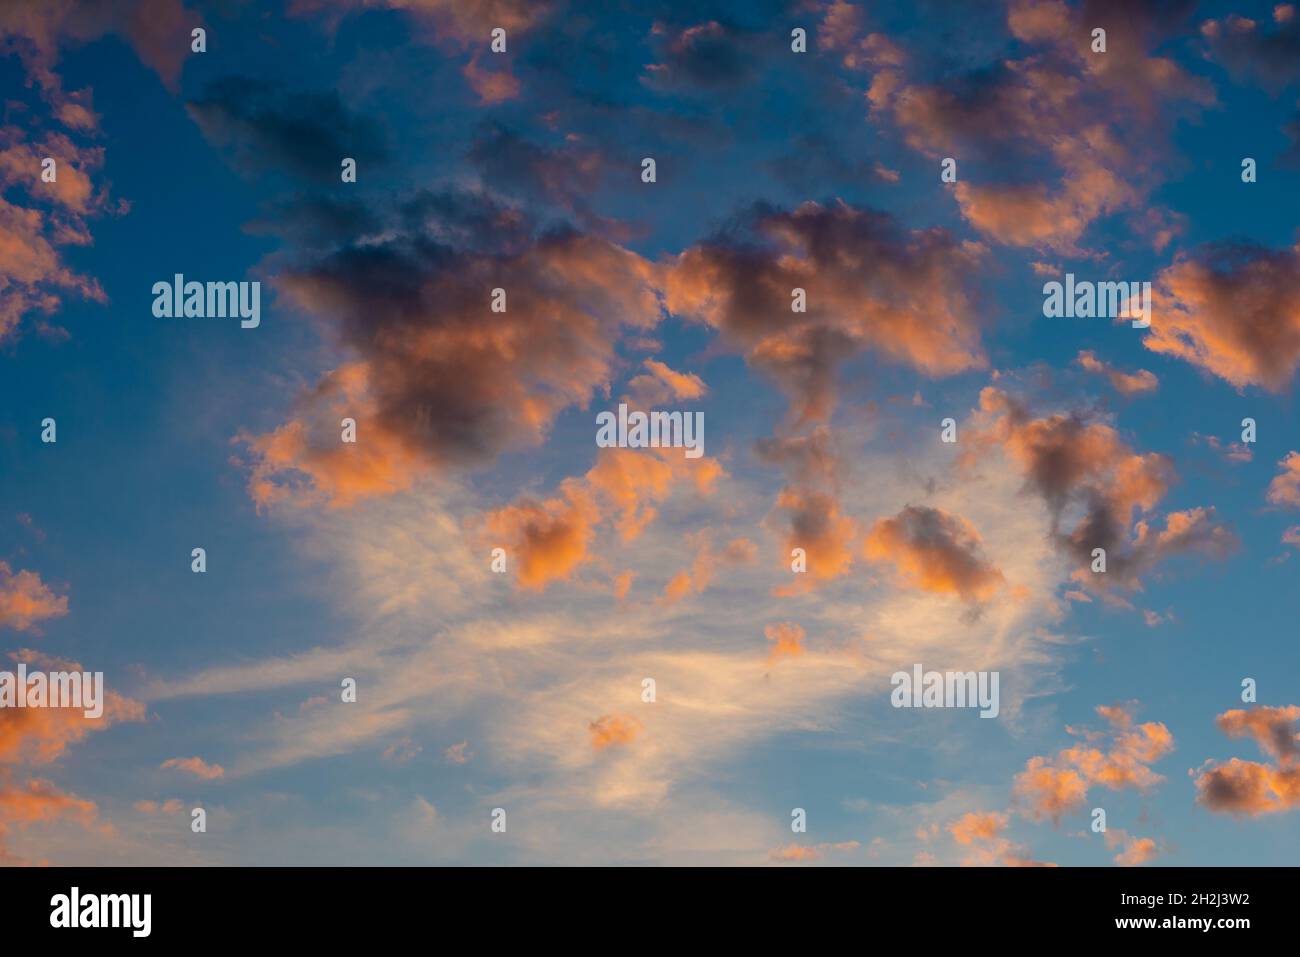 idyllic sunrise cloudscape sky with pink black and white coloured cumulus cloud formation in a pastel blue sky. Sunset or sunrise background image Stock Photo